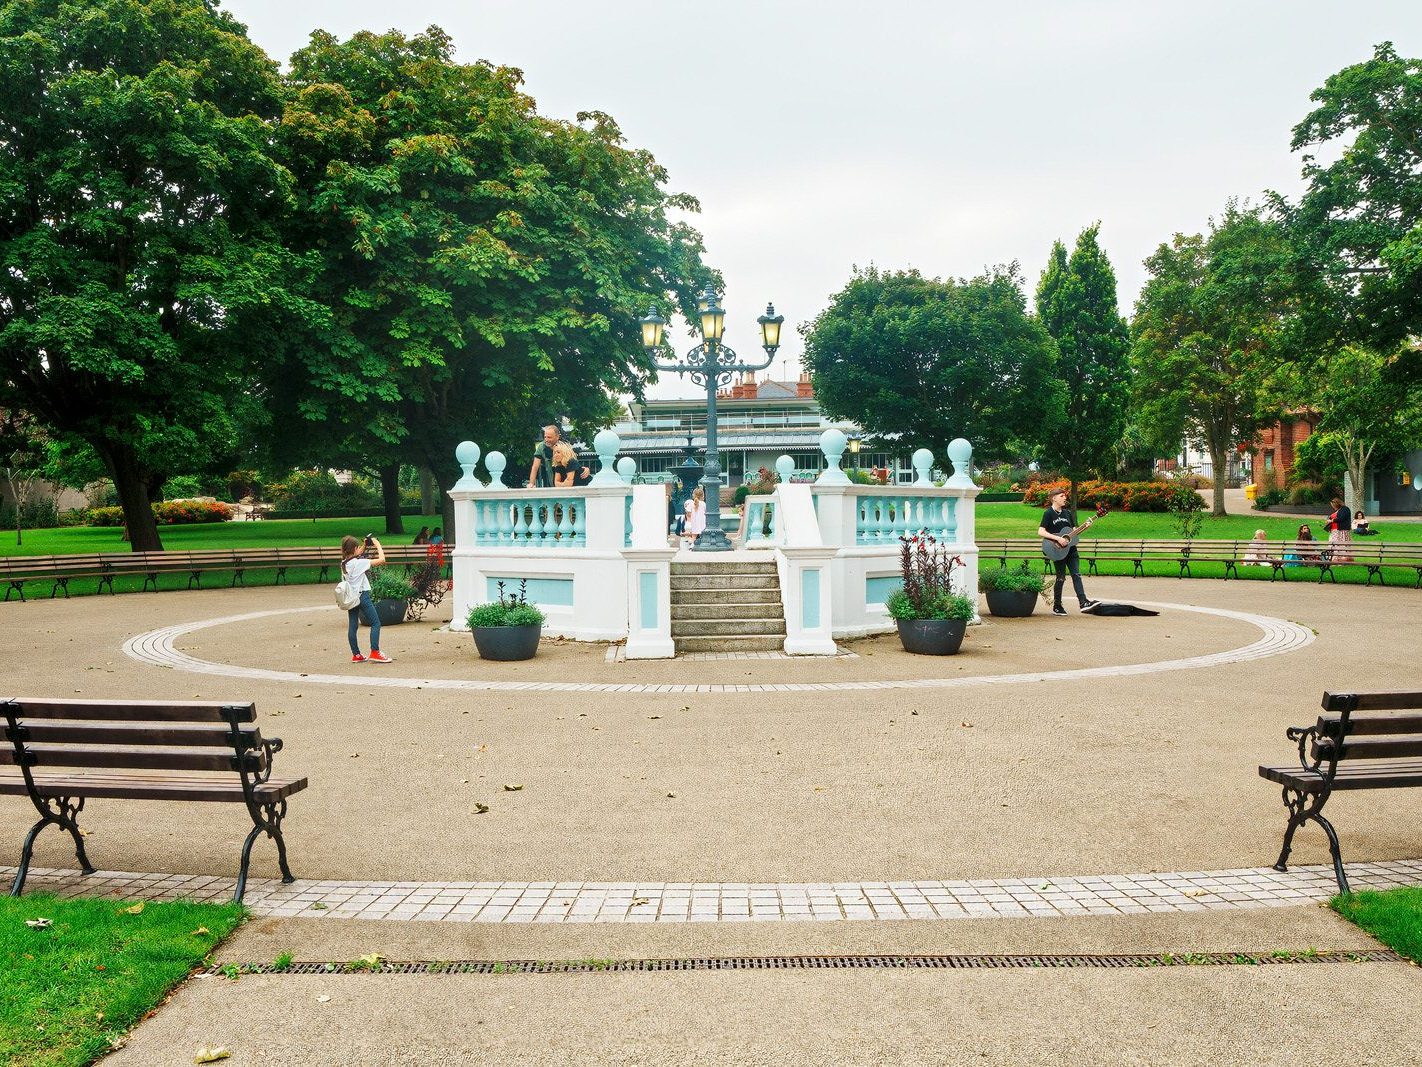 I REALLY LIKE THE PEOPLE'S PARK [AN ATTRACTIVE PUBLIC SPACE IN DUN LAOGHAIRE] 011